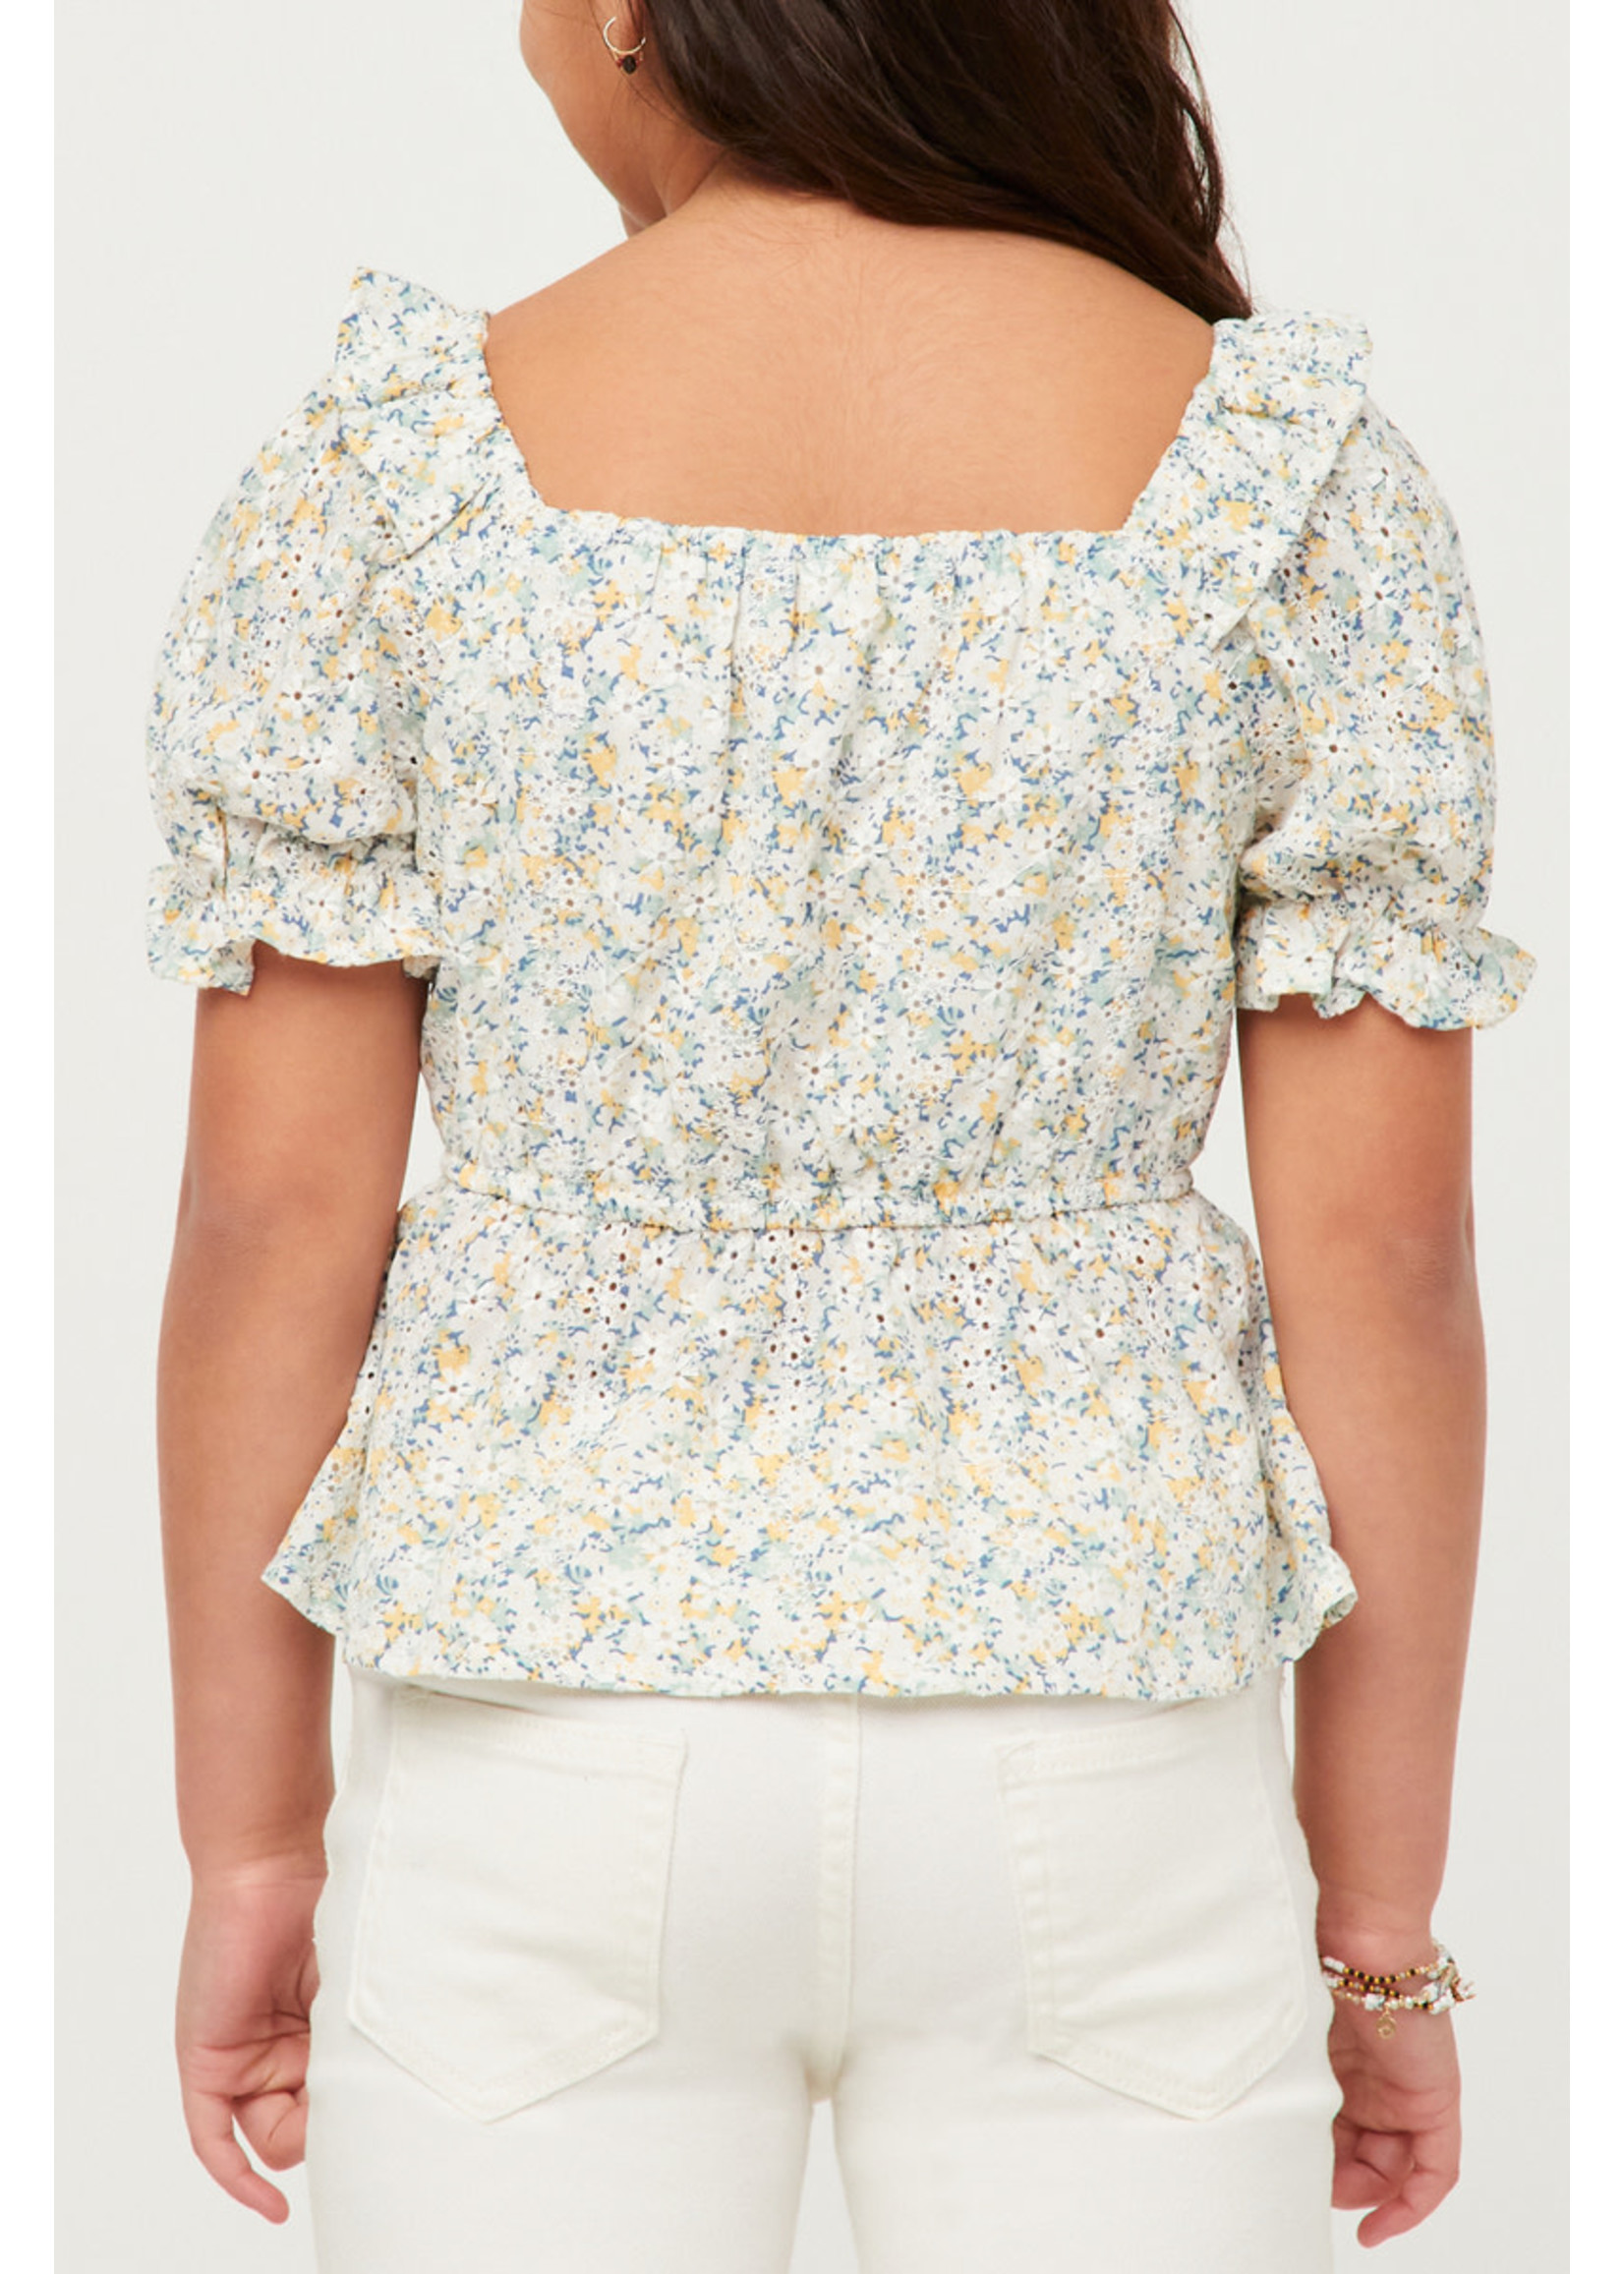 Hayden Girl Embroidered Eyelet Ruffled Floral Top